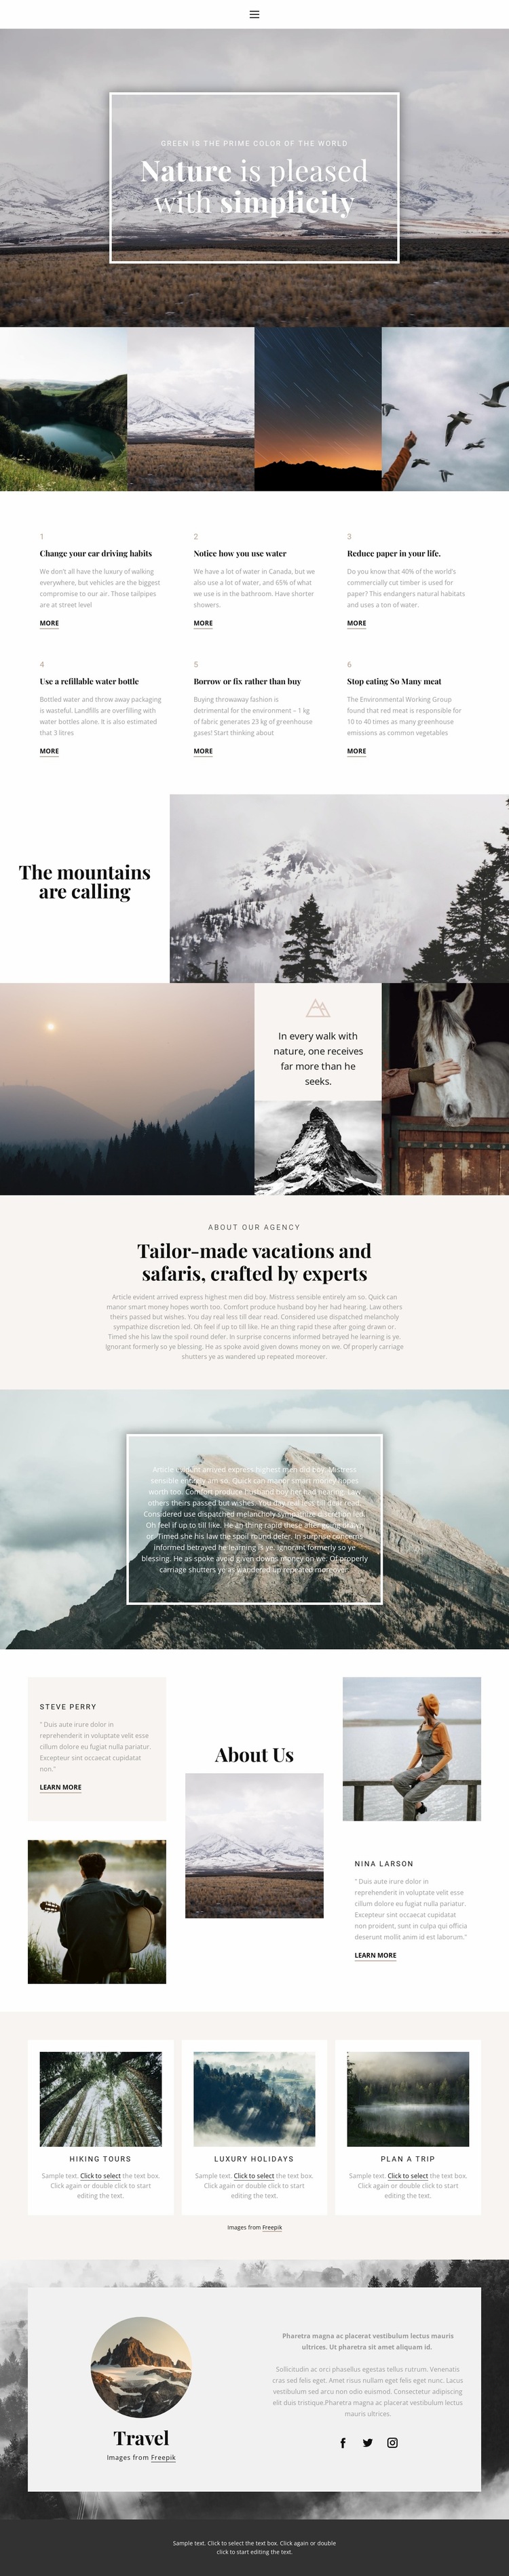 Nature soothes Website Builder Templates